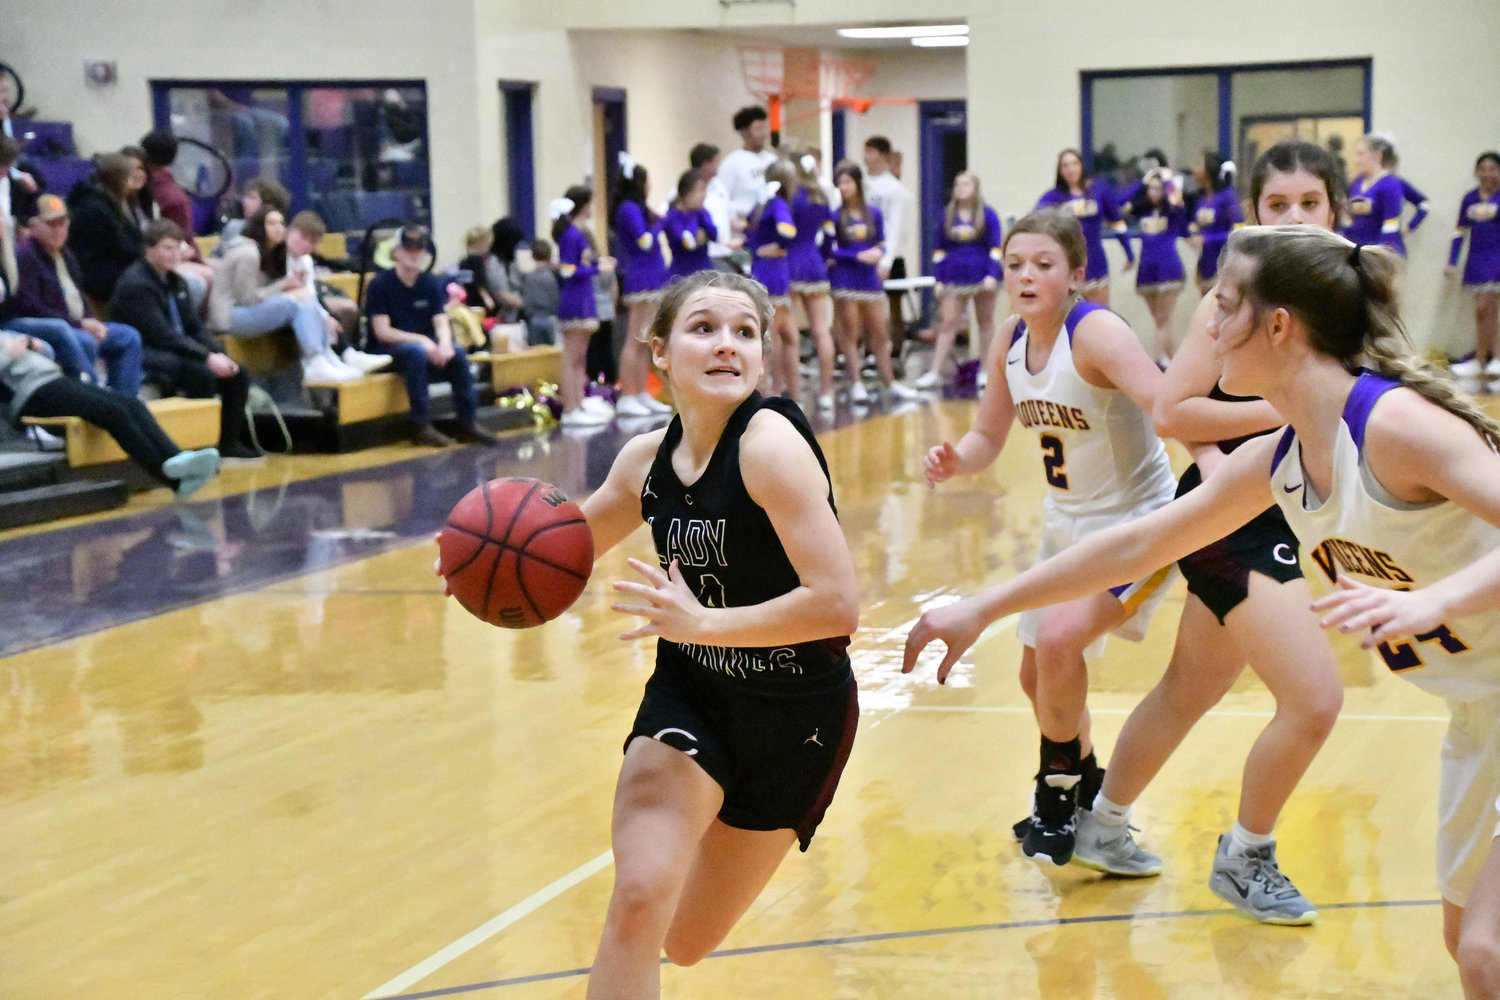 Jayli Childress (4) drives to the basket and scores for the Lady Bulldogs. Childress had five points for Cornersville.